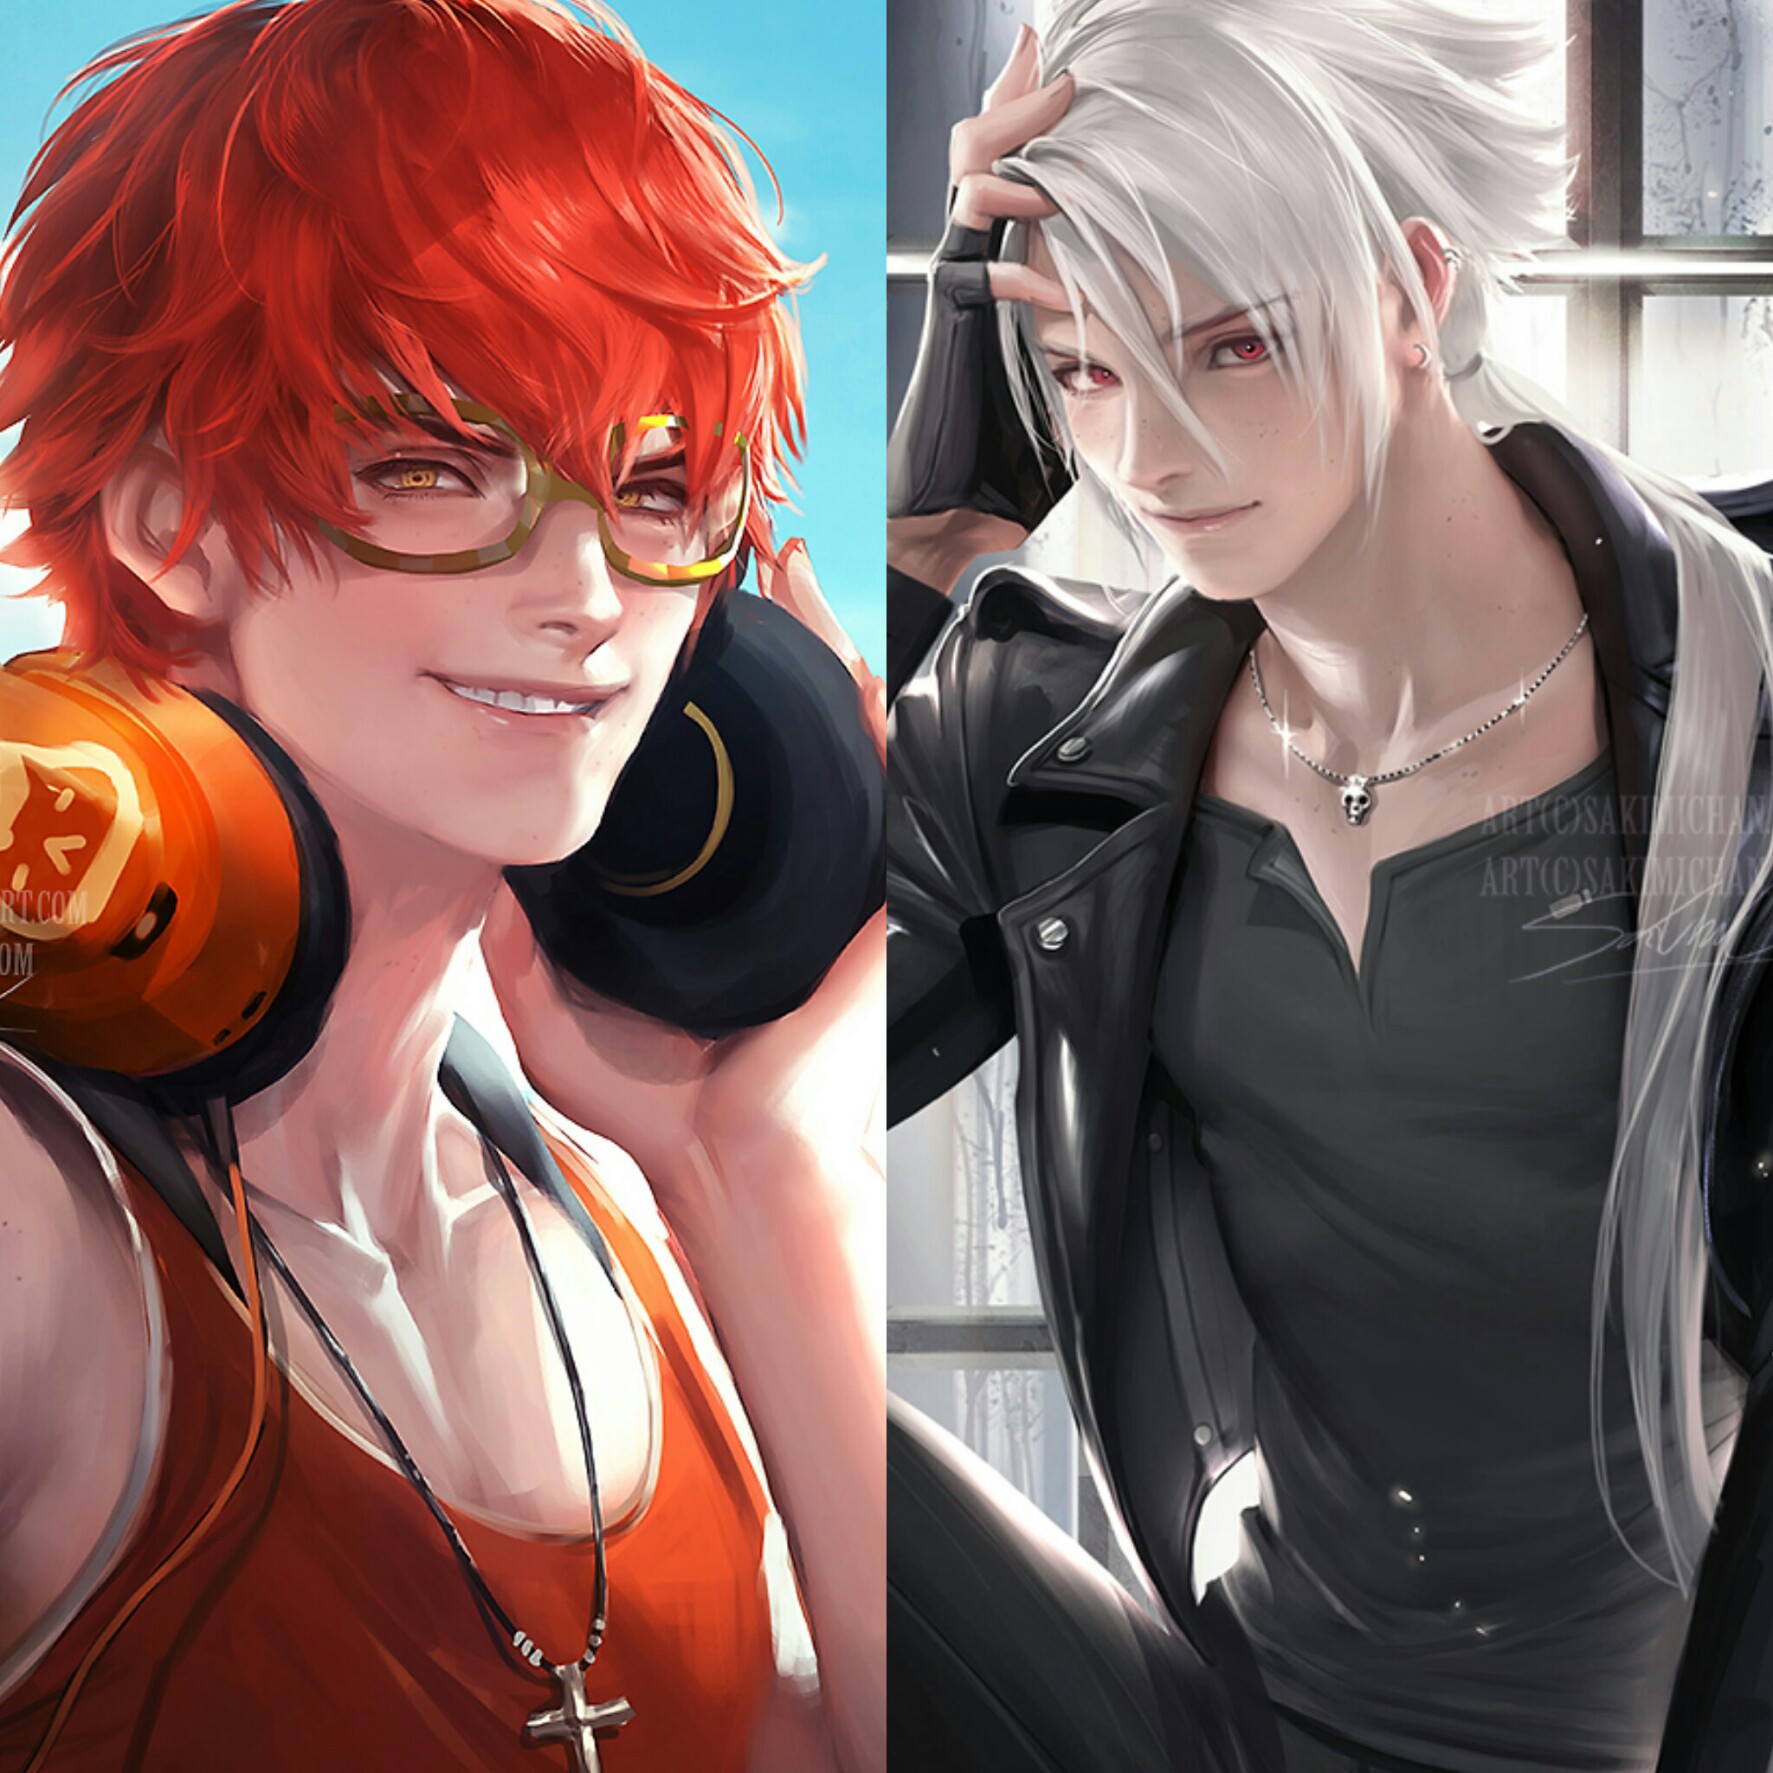 Zen and 707 from mystic messenger by image by @olsonleeemma.